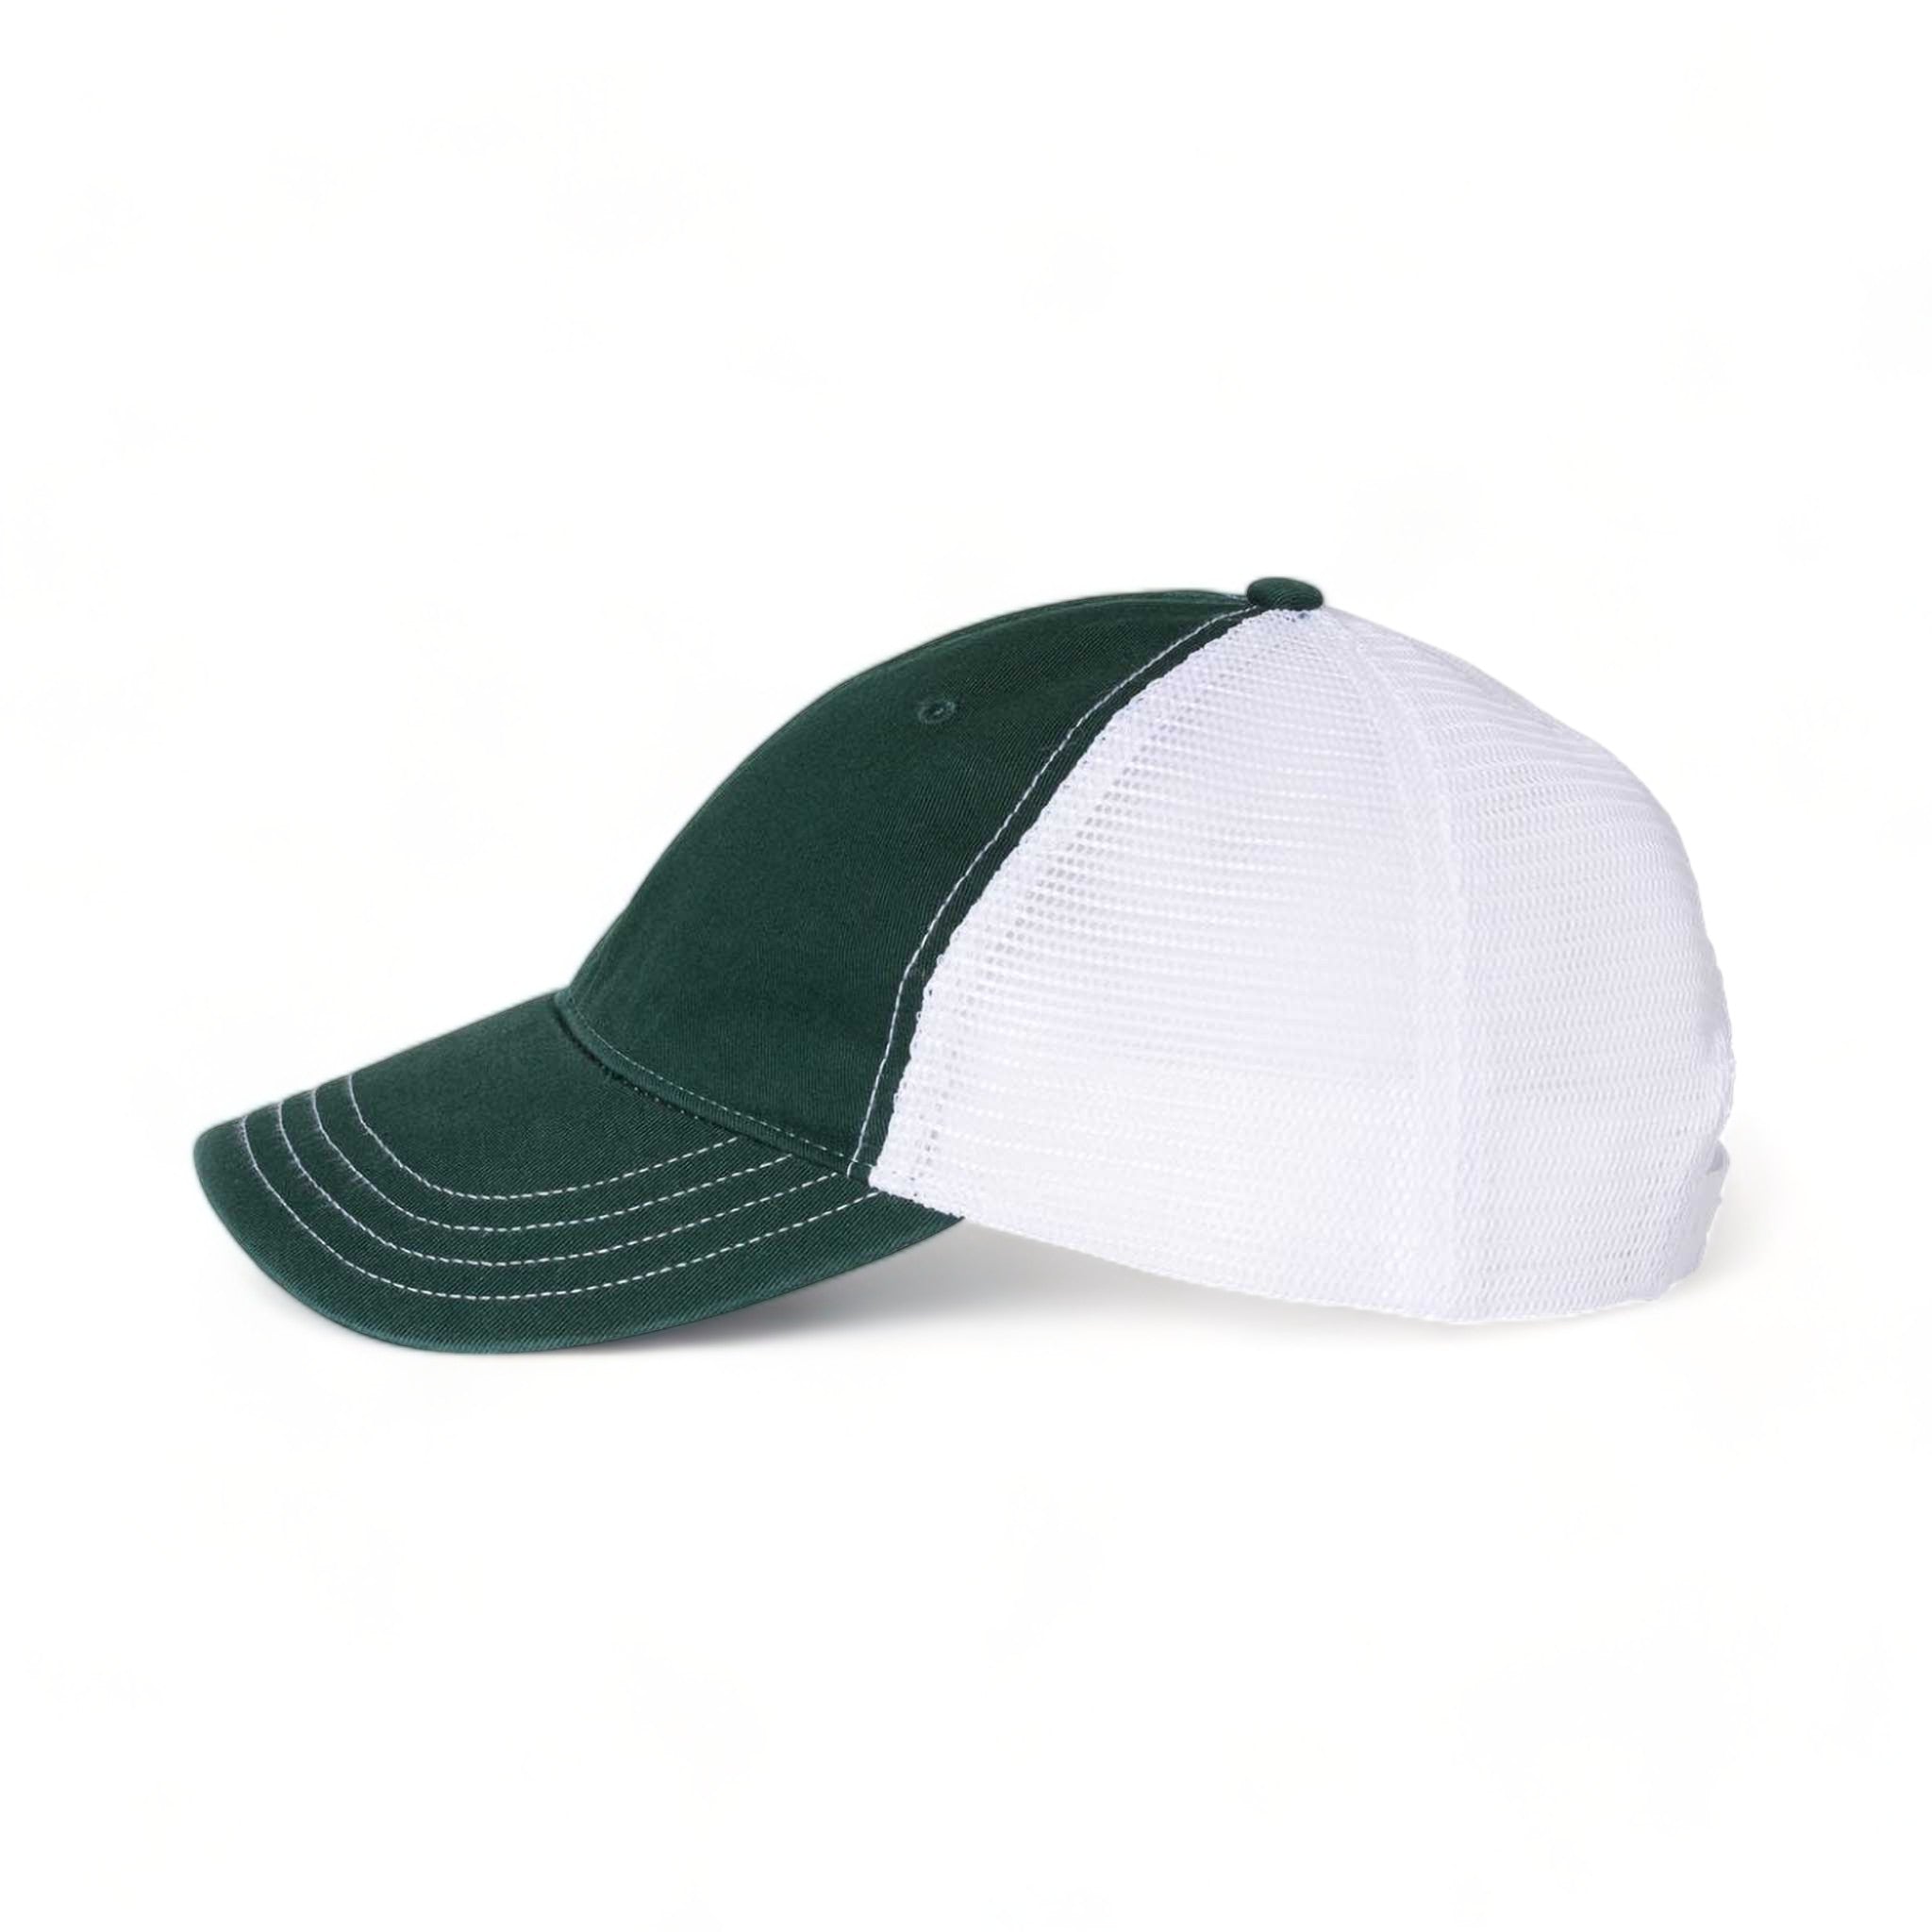 Side view of Richardson 111 custom hat in dark green and white